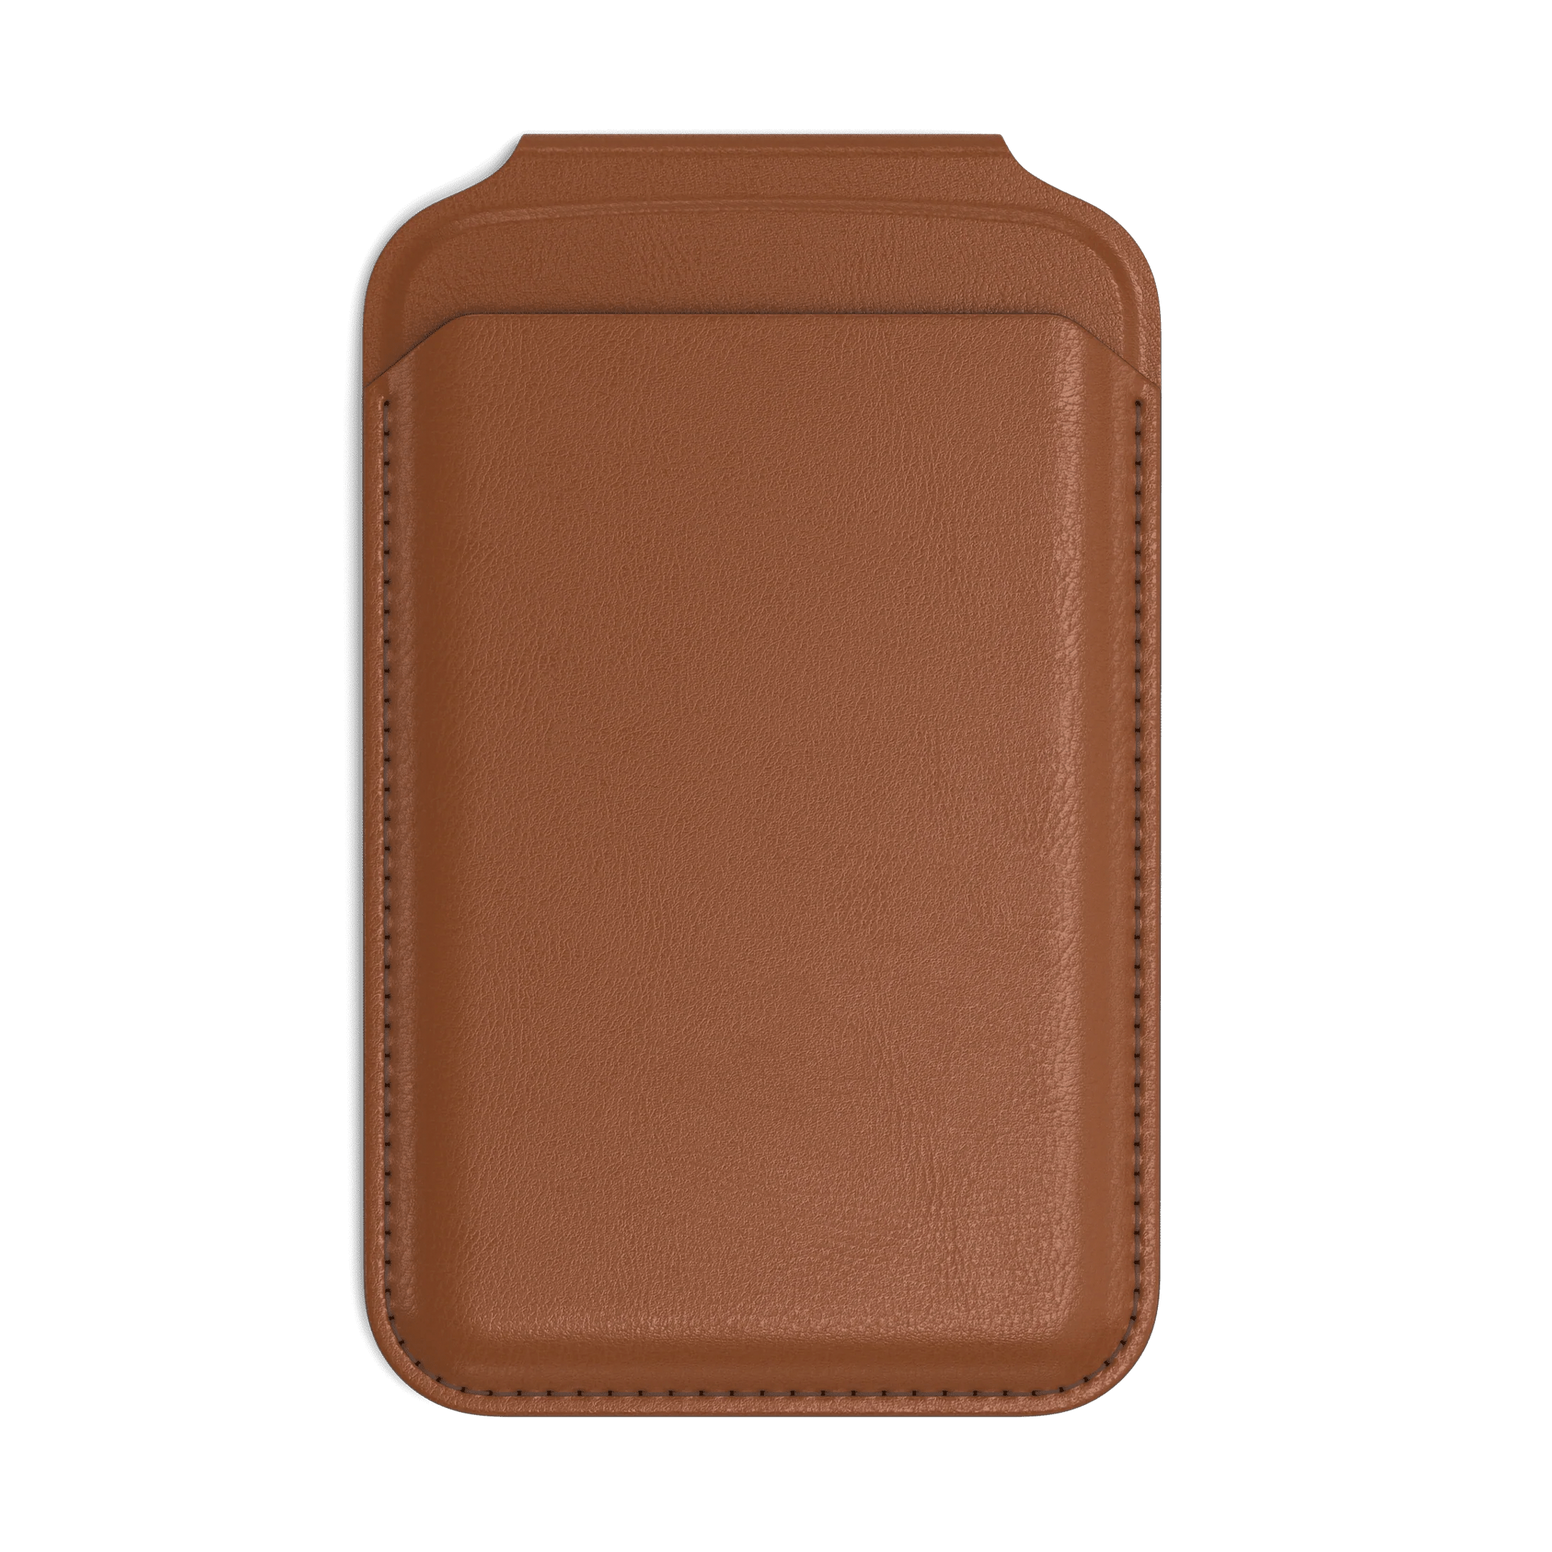 Satechi Vegan Leather Magnetic Wallet Stand - Brown